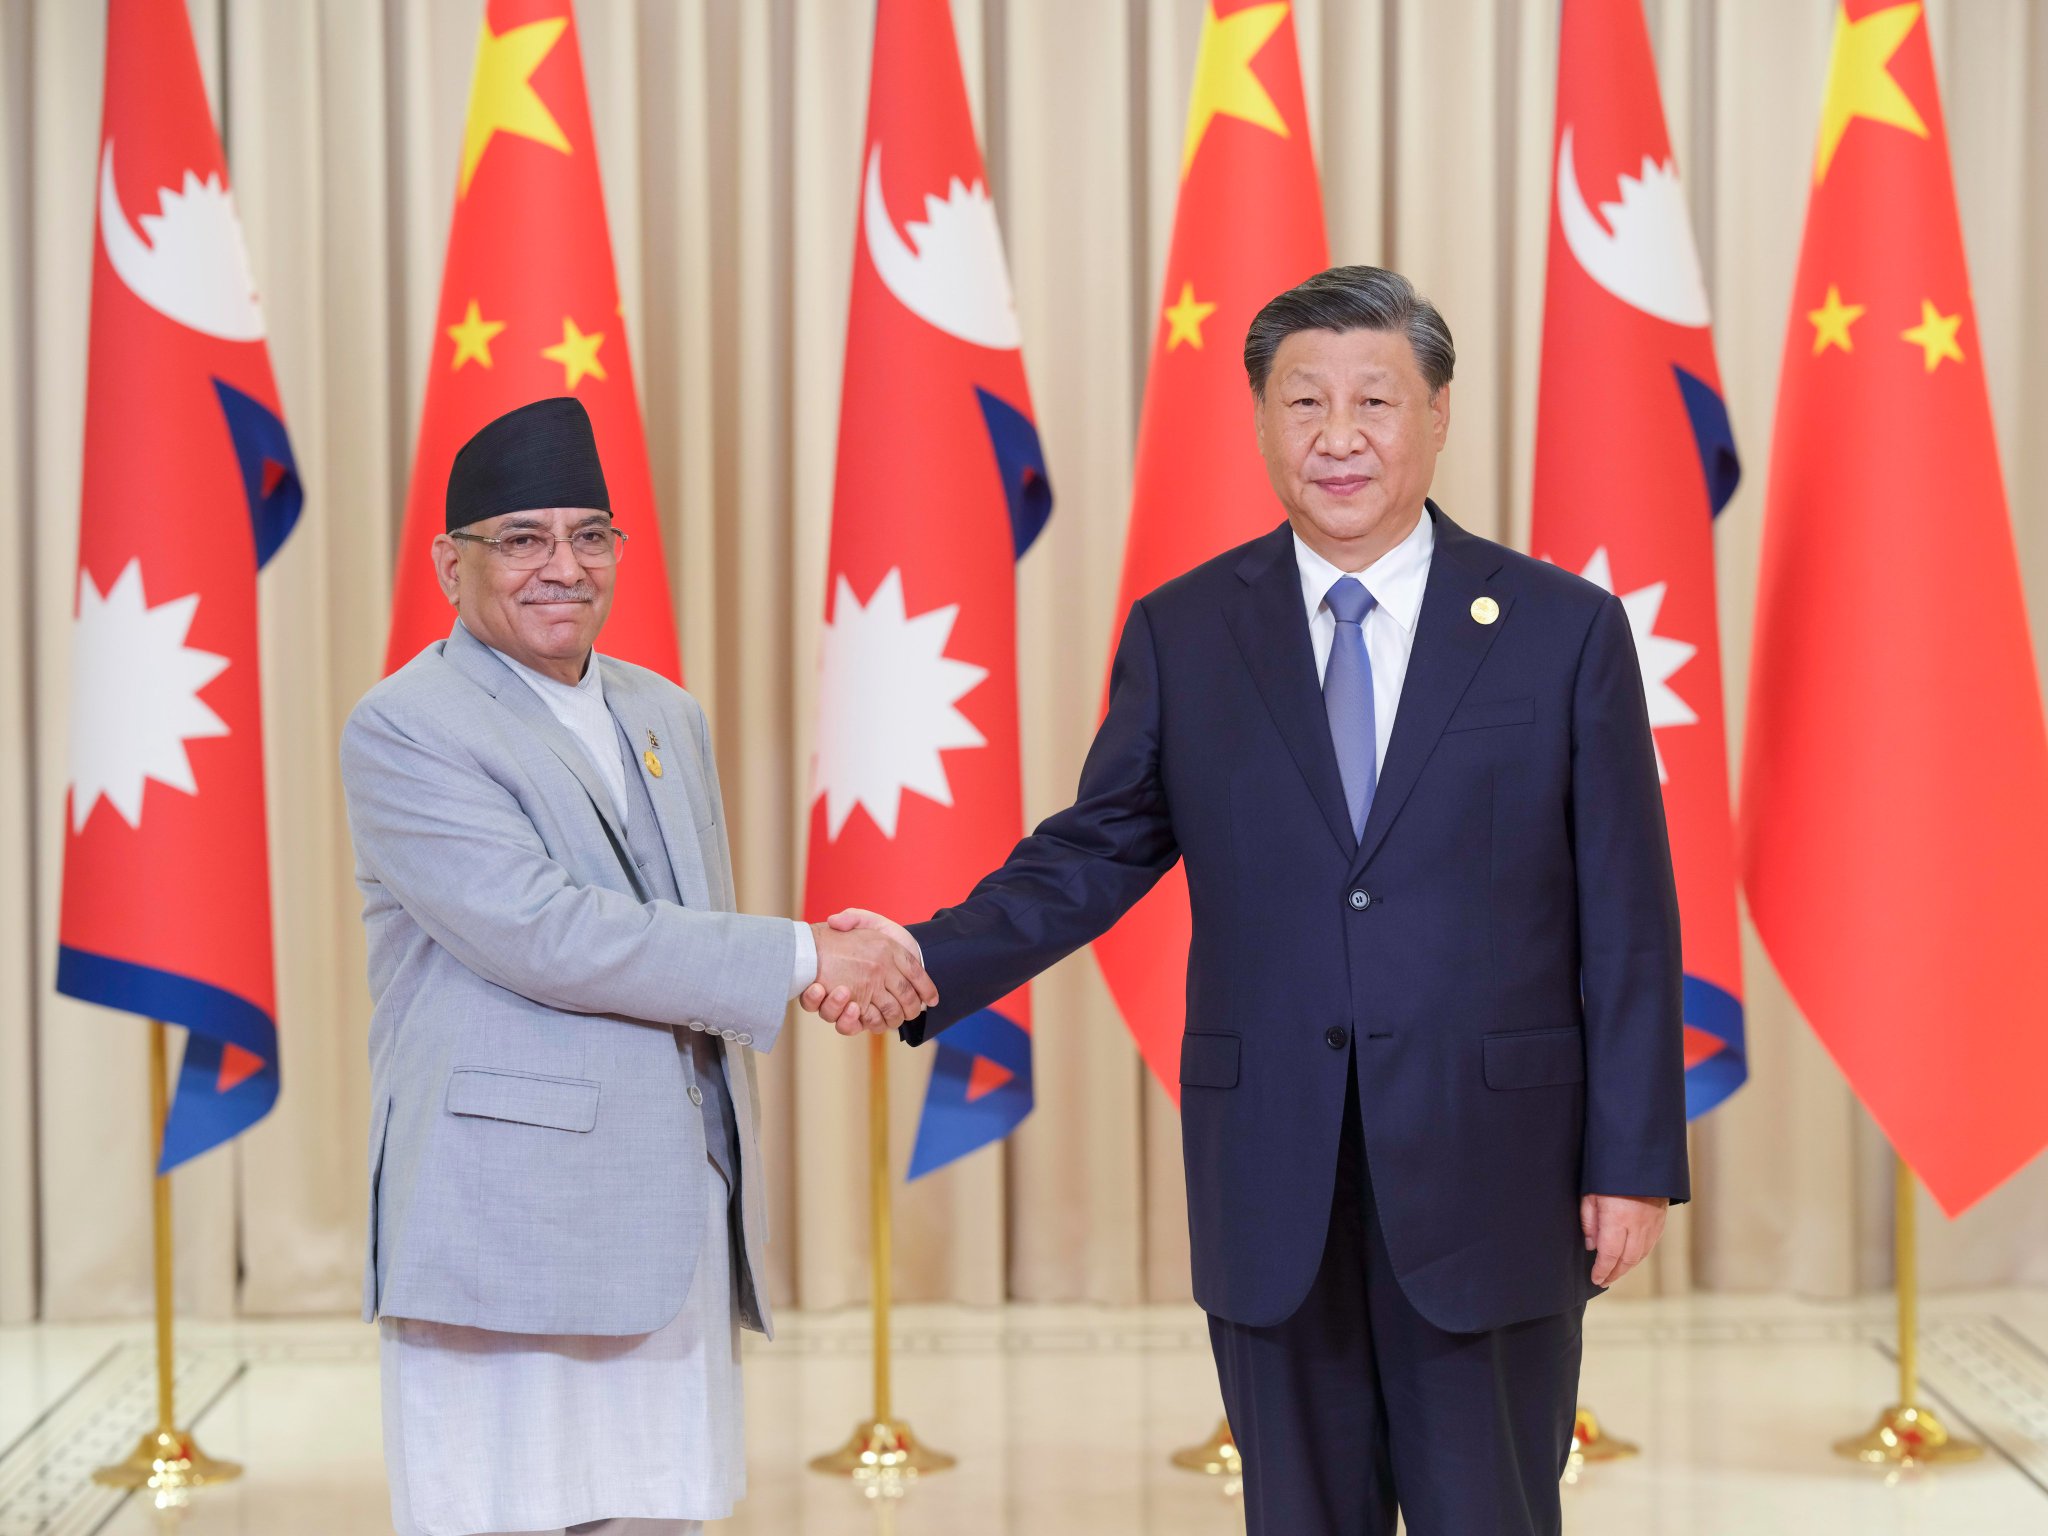 Nepal’s Prime Minister walks tightrope in Beijing, signs host of agreements with China but not one under BRI